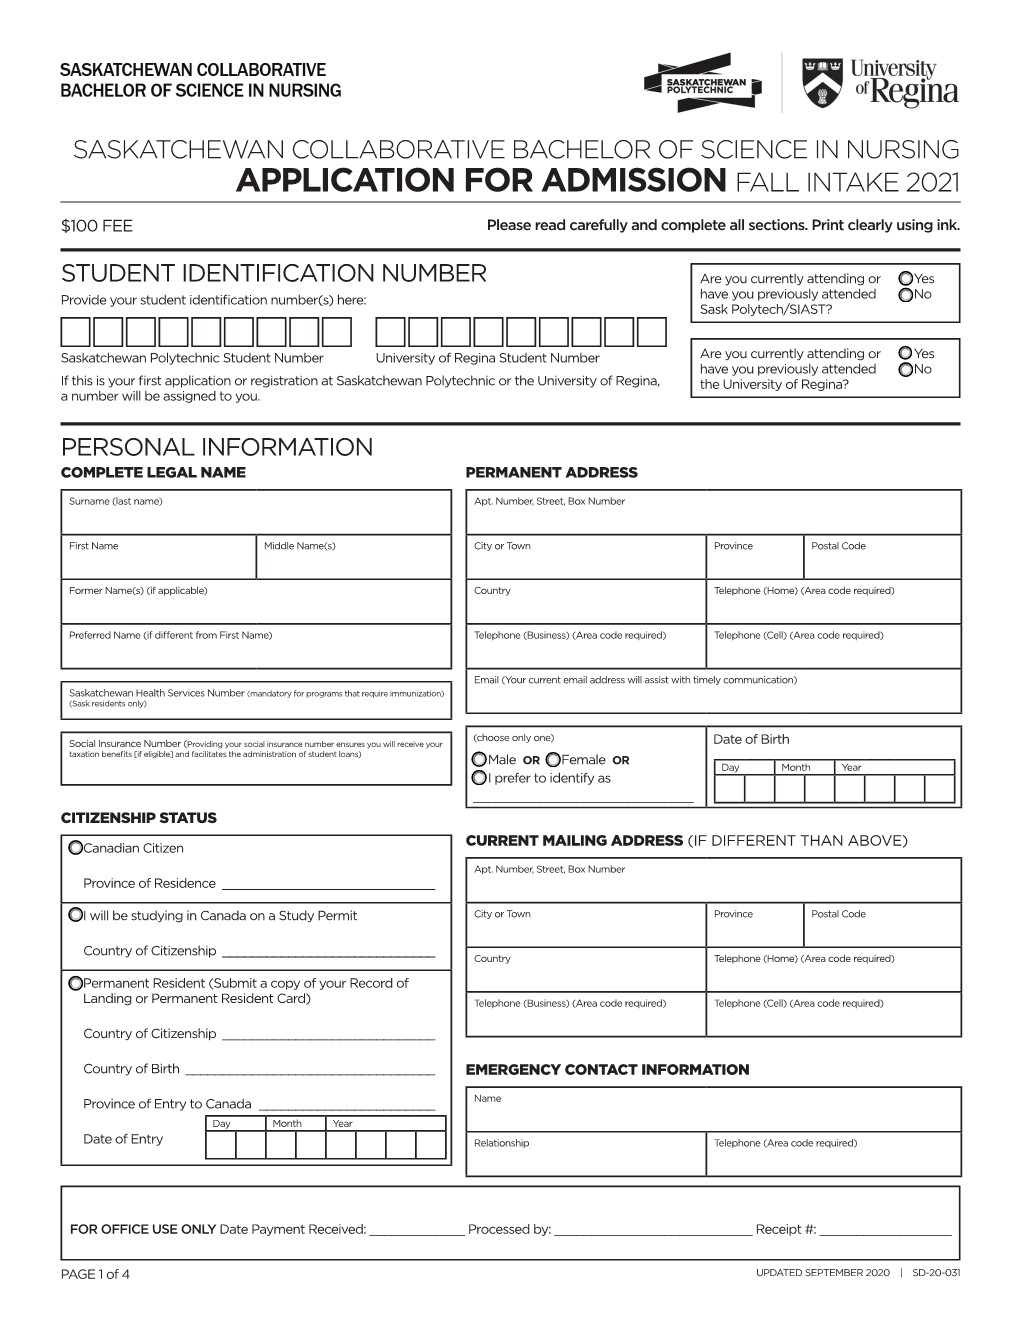 Application for Admission Fall Intake 2021